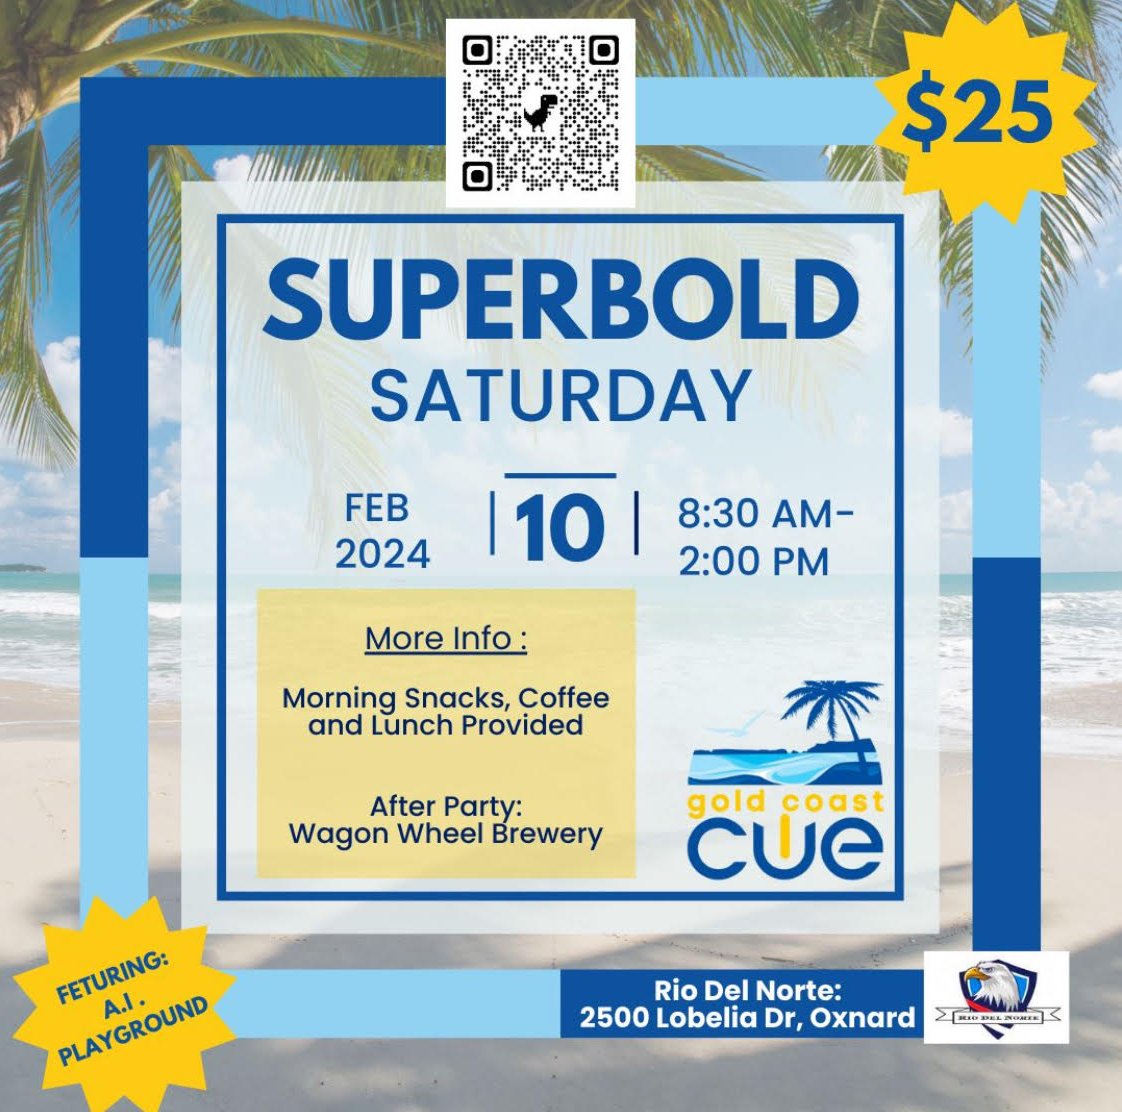 PREGAME THE BIG GAME WITH SOME PD! Join us for #SuperBoldSaturday in 2 days. Food, giveaways, AI playground, and more! All for just $25. Also, keep it going at Wagon Wheel Brewing after the event. gccuesuperboldsaturday2024.sched.com